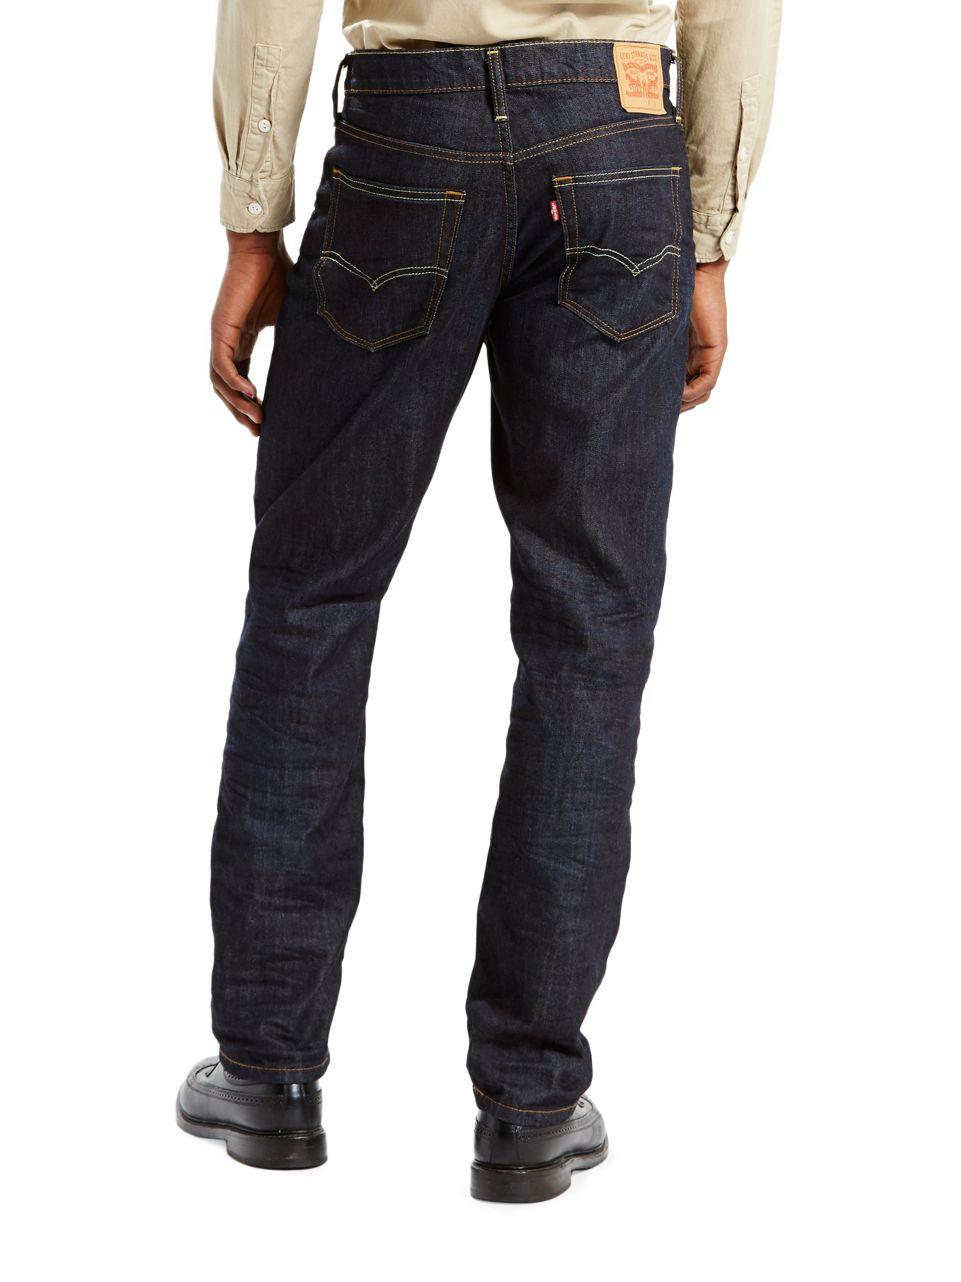 Lyst - Levi'S Big And Tall 541 Rigid Dragon Jeans in Blue for Men